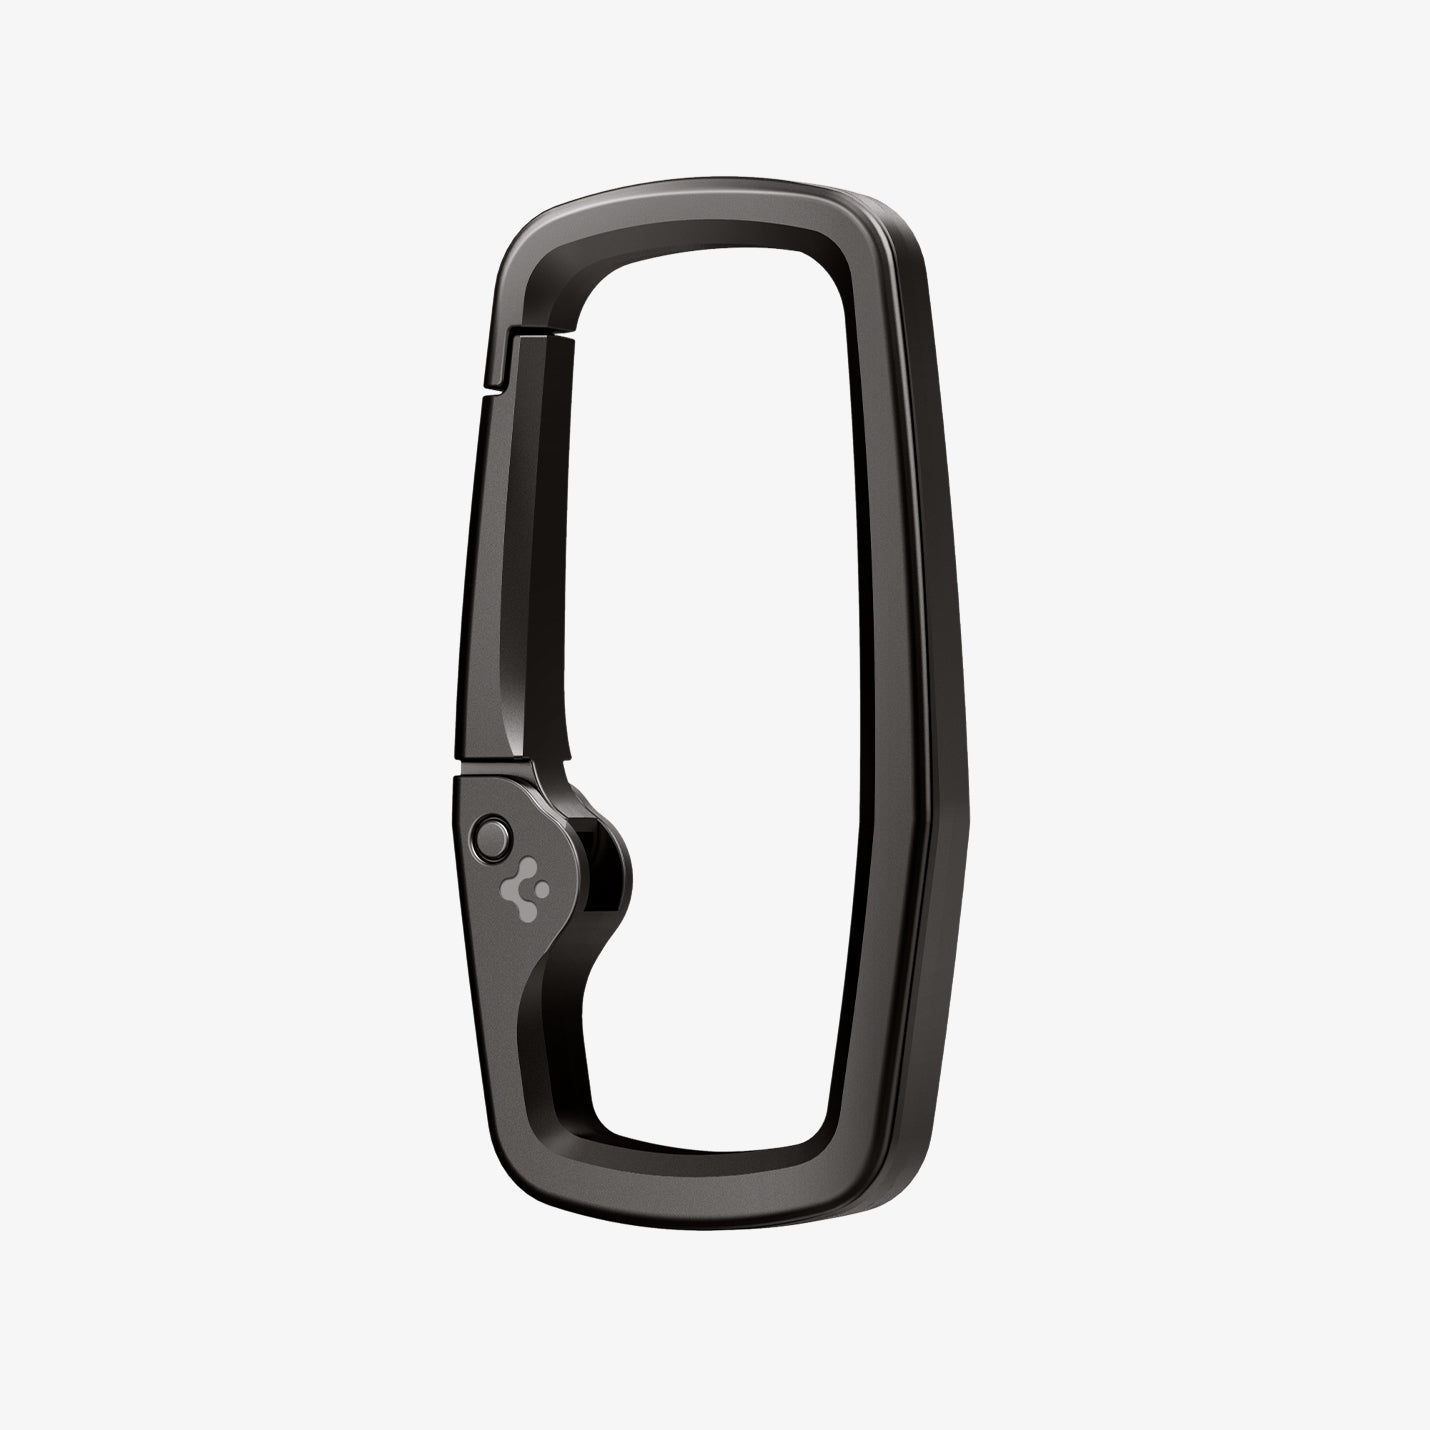 AHP02933 - Carabiner Rugged Type in black showing the front and partial side